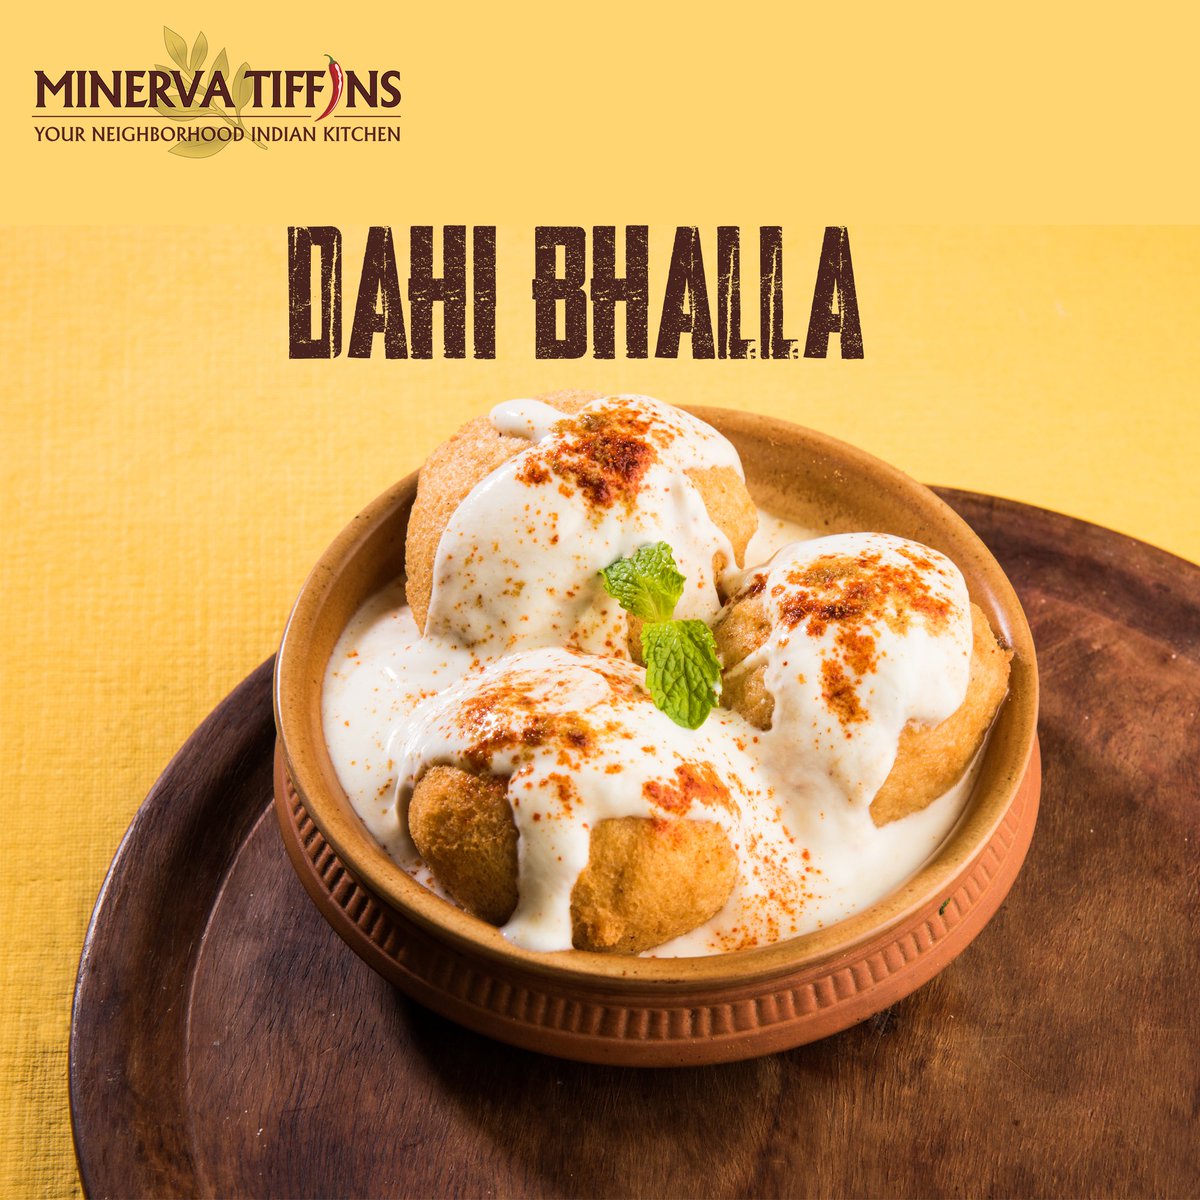 Indulge in the creamy goodness of Dahi Bhalla at Minerva Tiffins. You can never have just one bite!
Visit📍16 Lebovic Ave, Scarborough, ON M1L 4V9
.
.
.
#minervatiffins #minerva #minervafoods #dinein #cateringservice #dahibhalla #dahi #dahivada #healthyfood #homefood💁🏻🇮🇳 🇨🇦